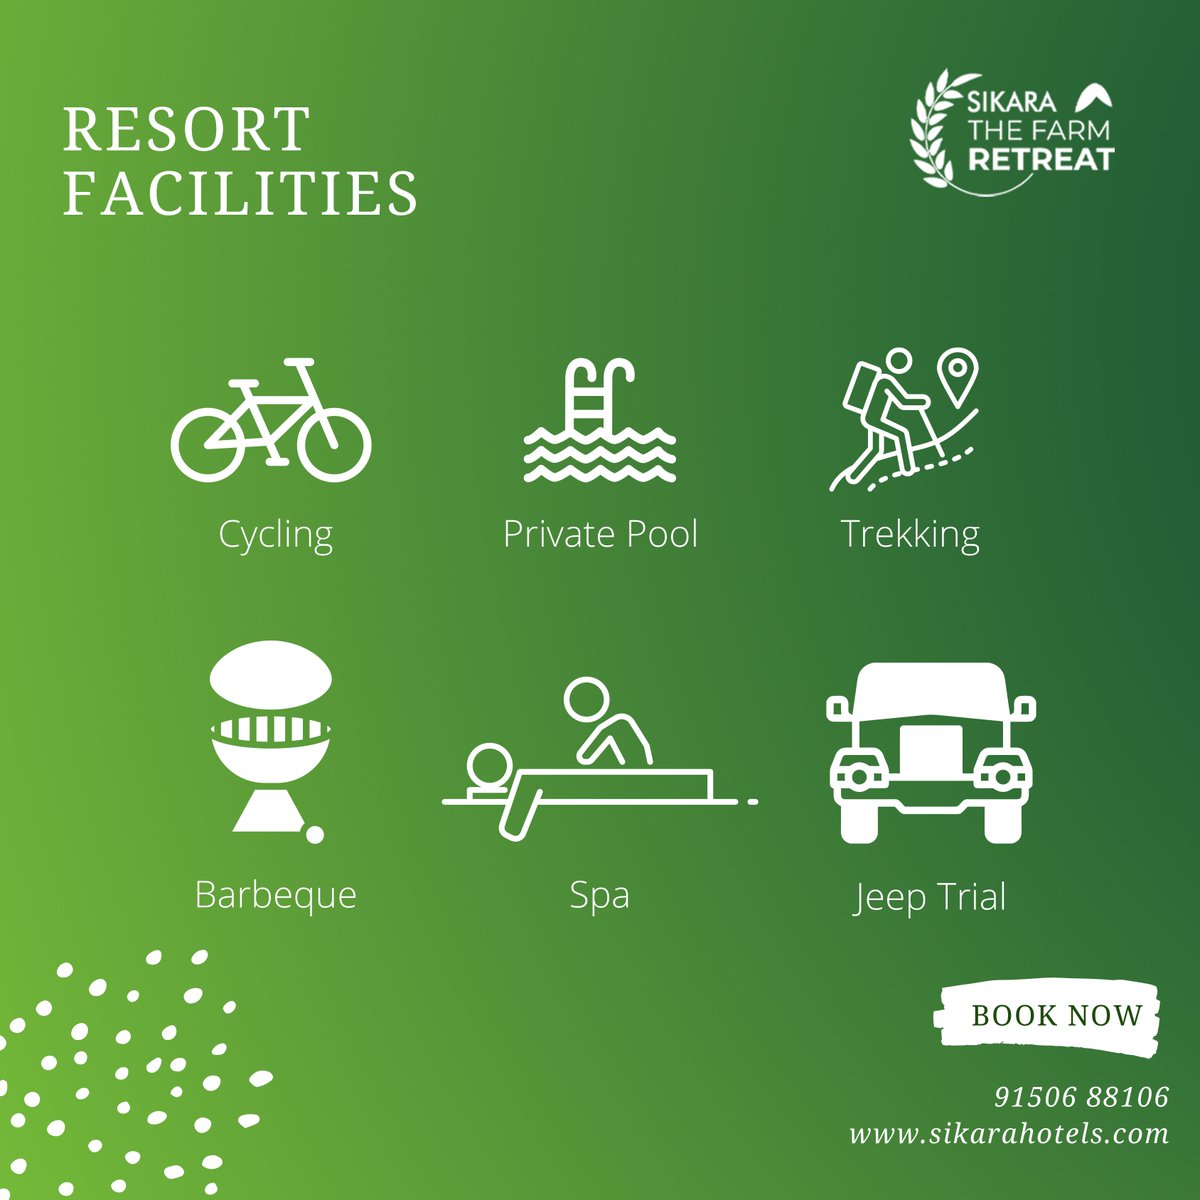 Experience both our adventurous and soulful activities along with your stay!
.
.
#hospitality #holiday #staycation #anaikatti #jeeptrails #spa #barbeque #cycling #trekking #privatebarbecue #privatepool #coimbatore